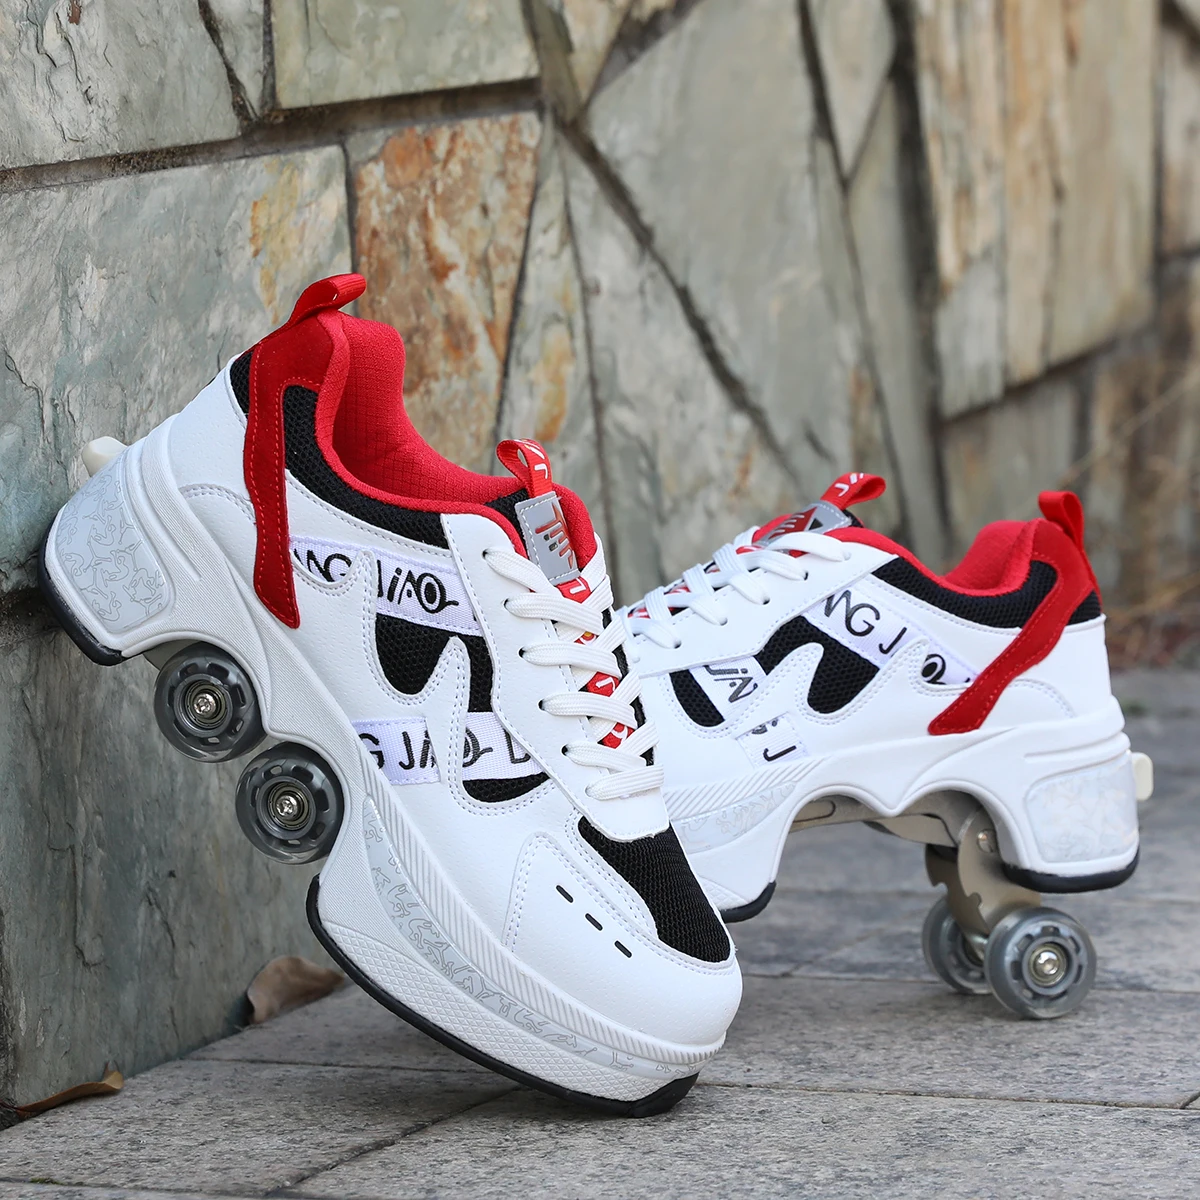 Adults Unisex Roller Skates with 4 Wheels Casual Shoes Deformation Heelys Parkour Sneakers For Kids Rounds Children Of Running enlarge